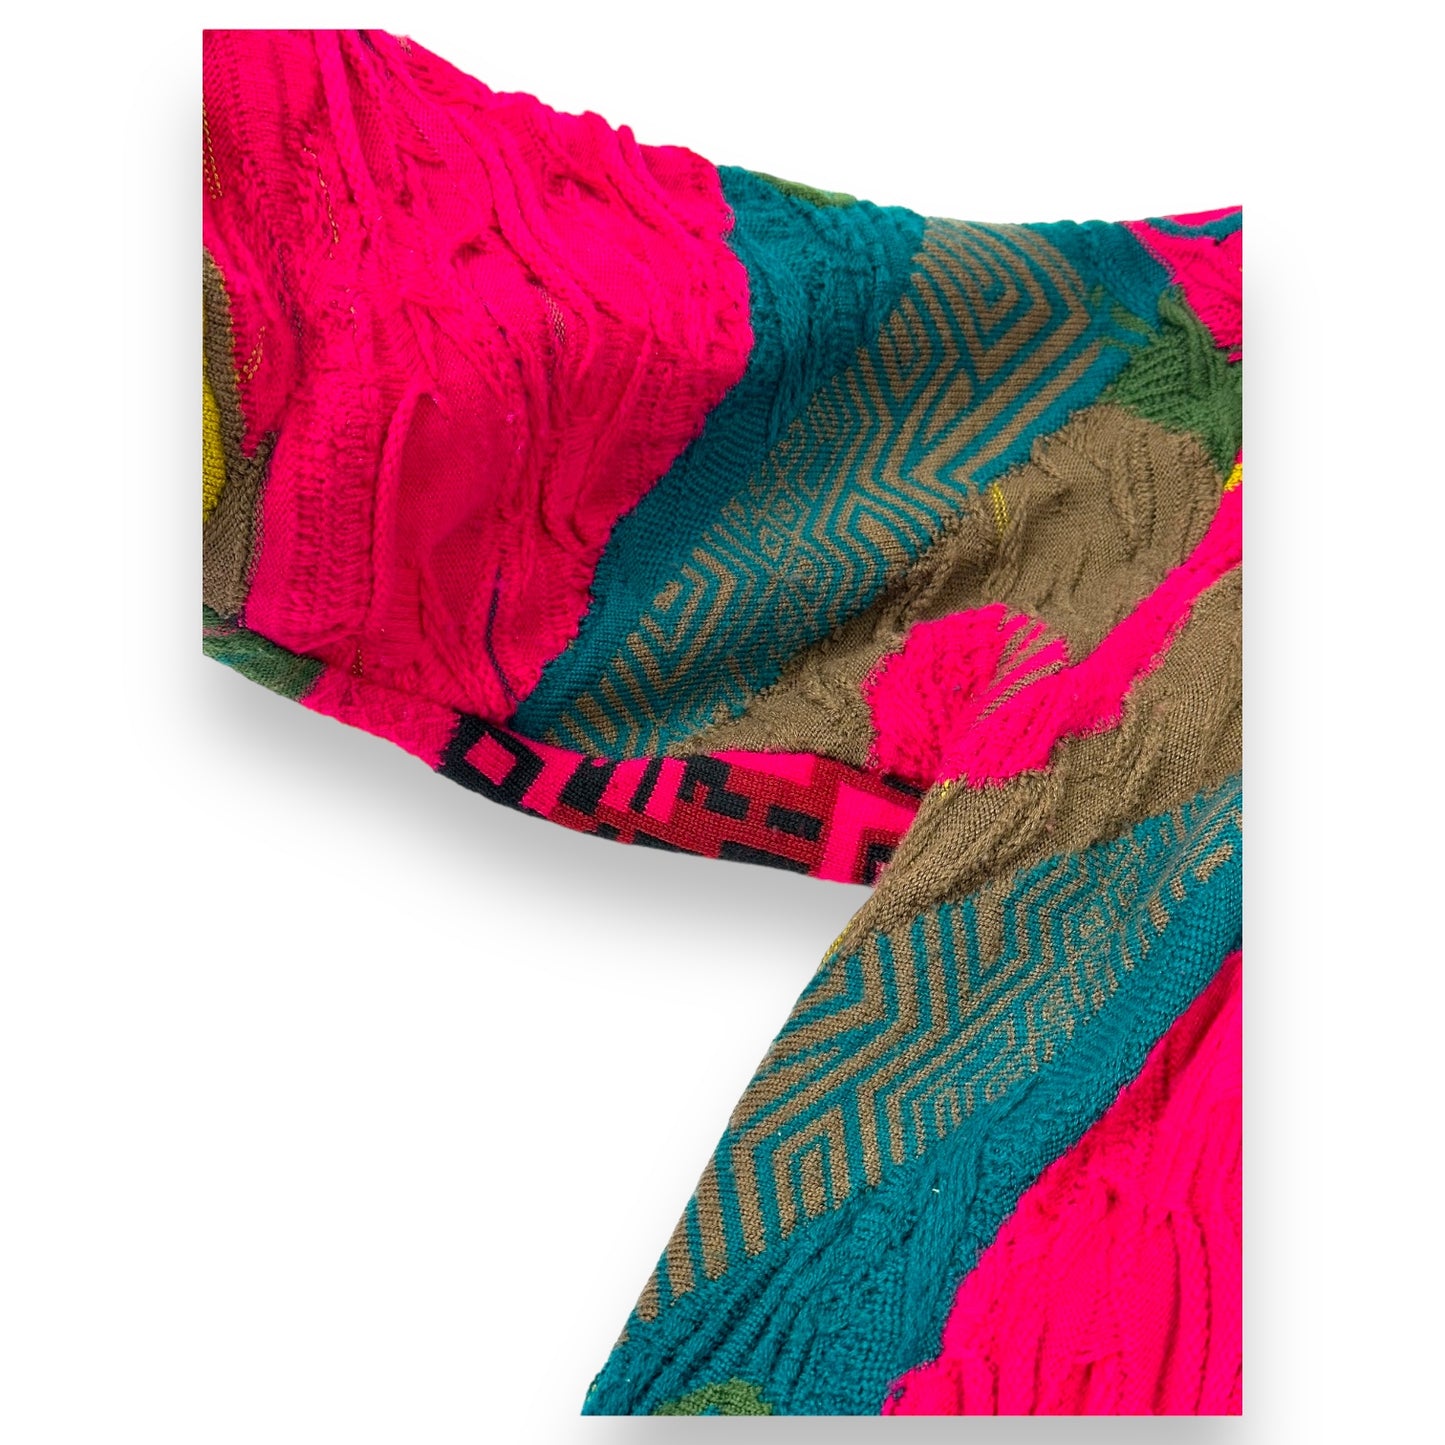 Y2K Coogi Pink Multicolored Sweater